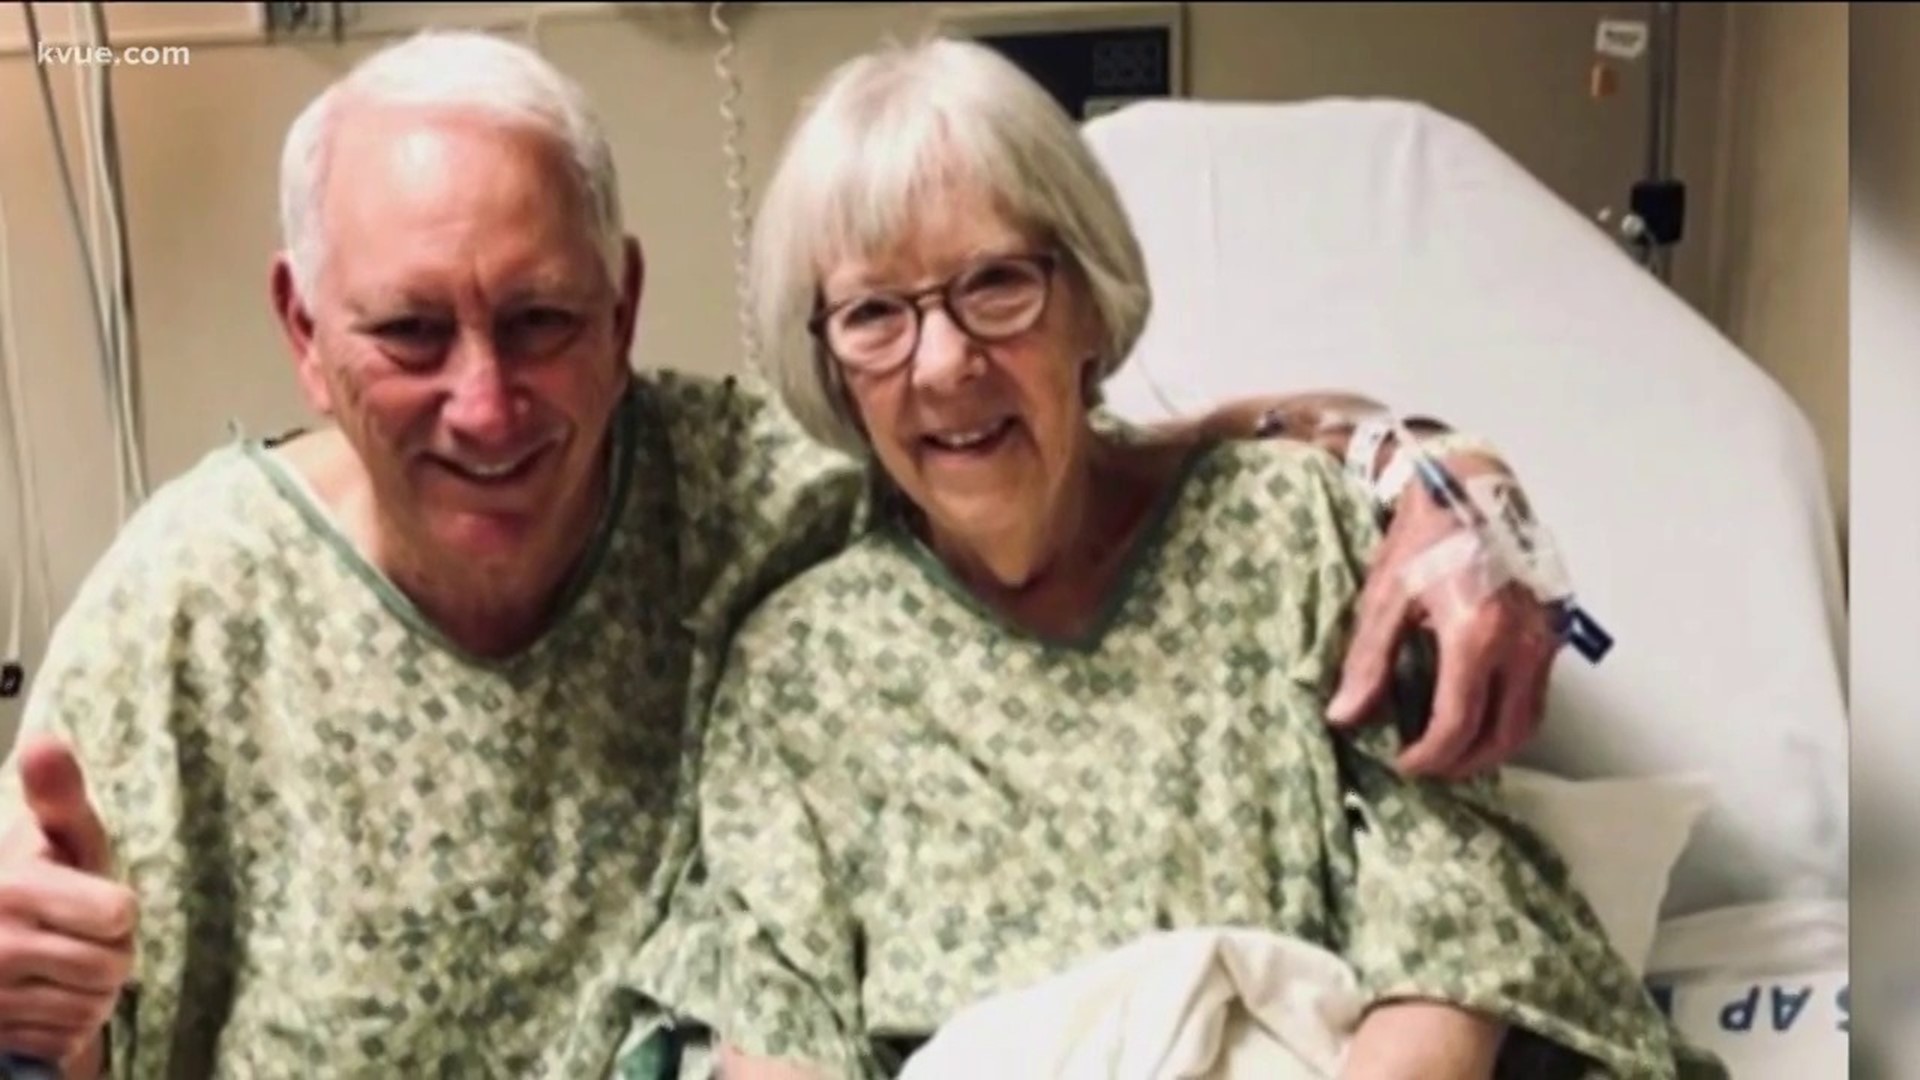 Husband of 50 years donates kidney to wife